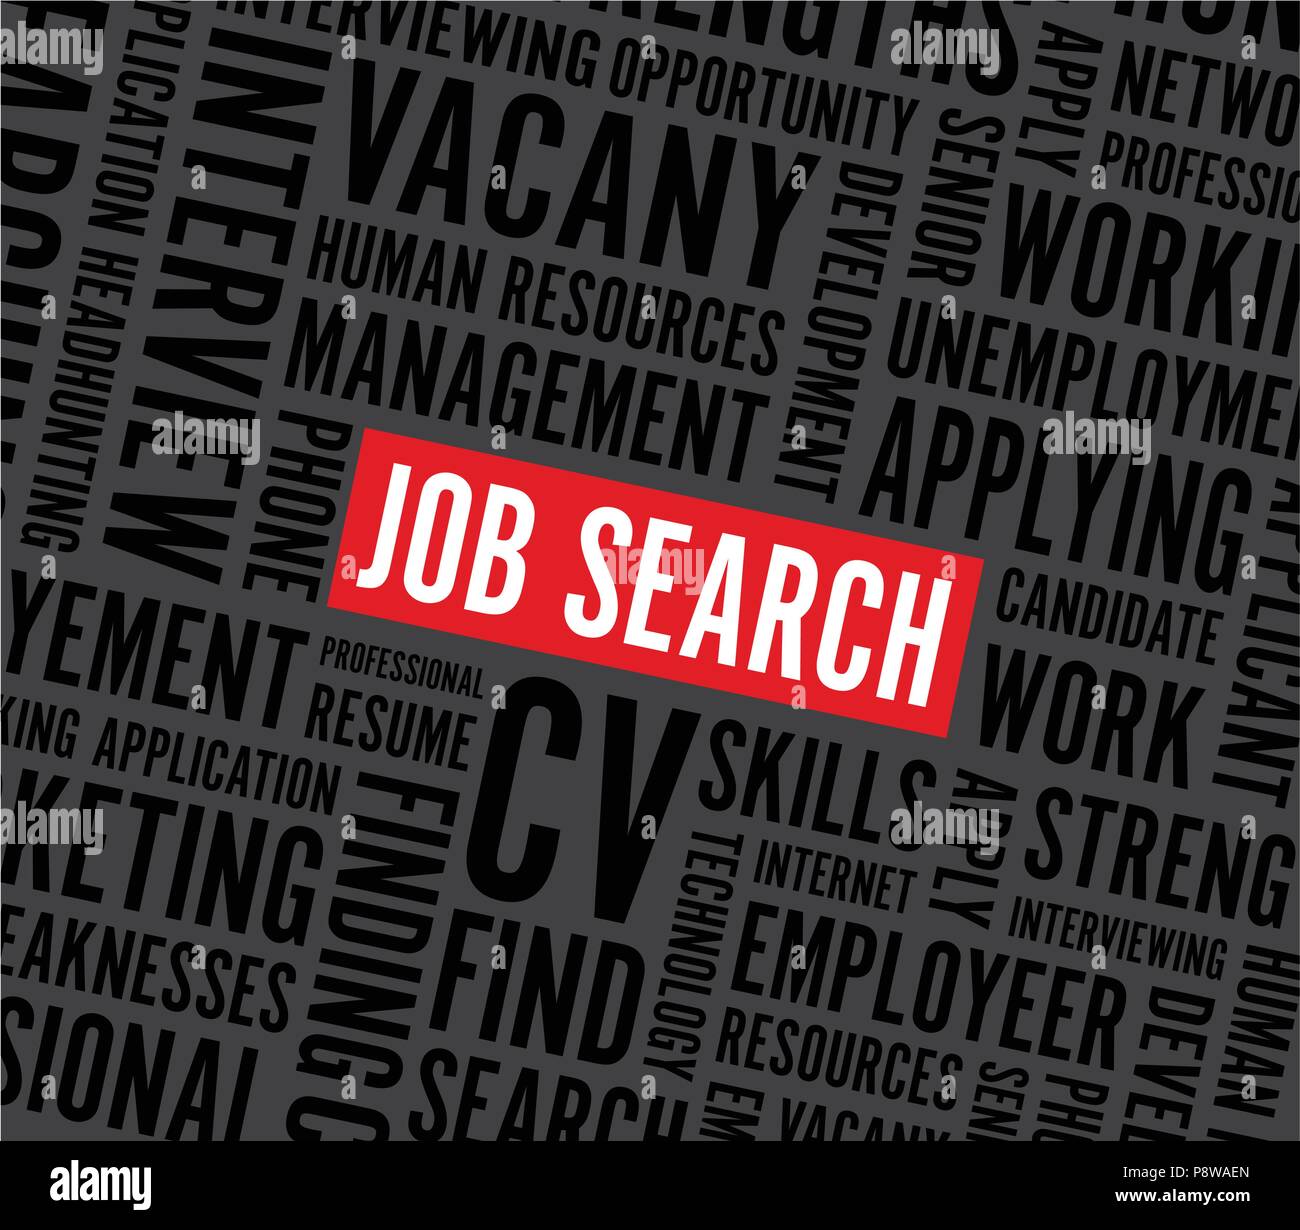 job search word background Stock Vector